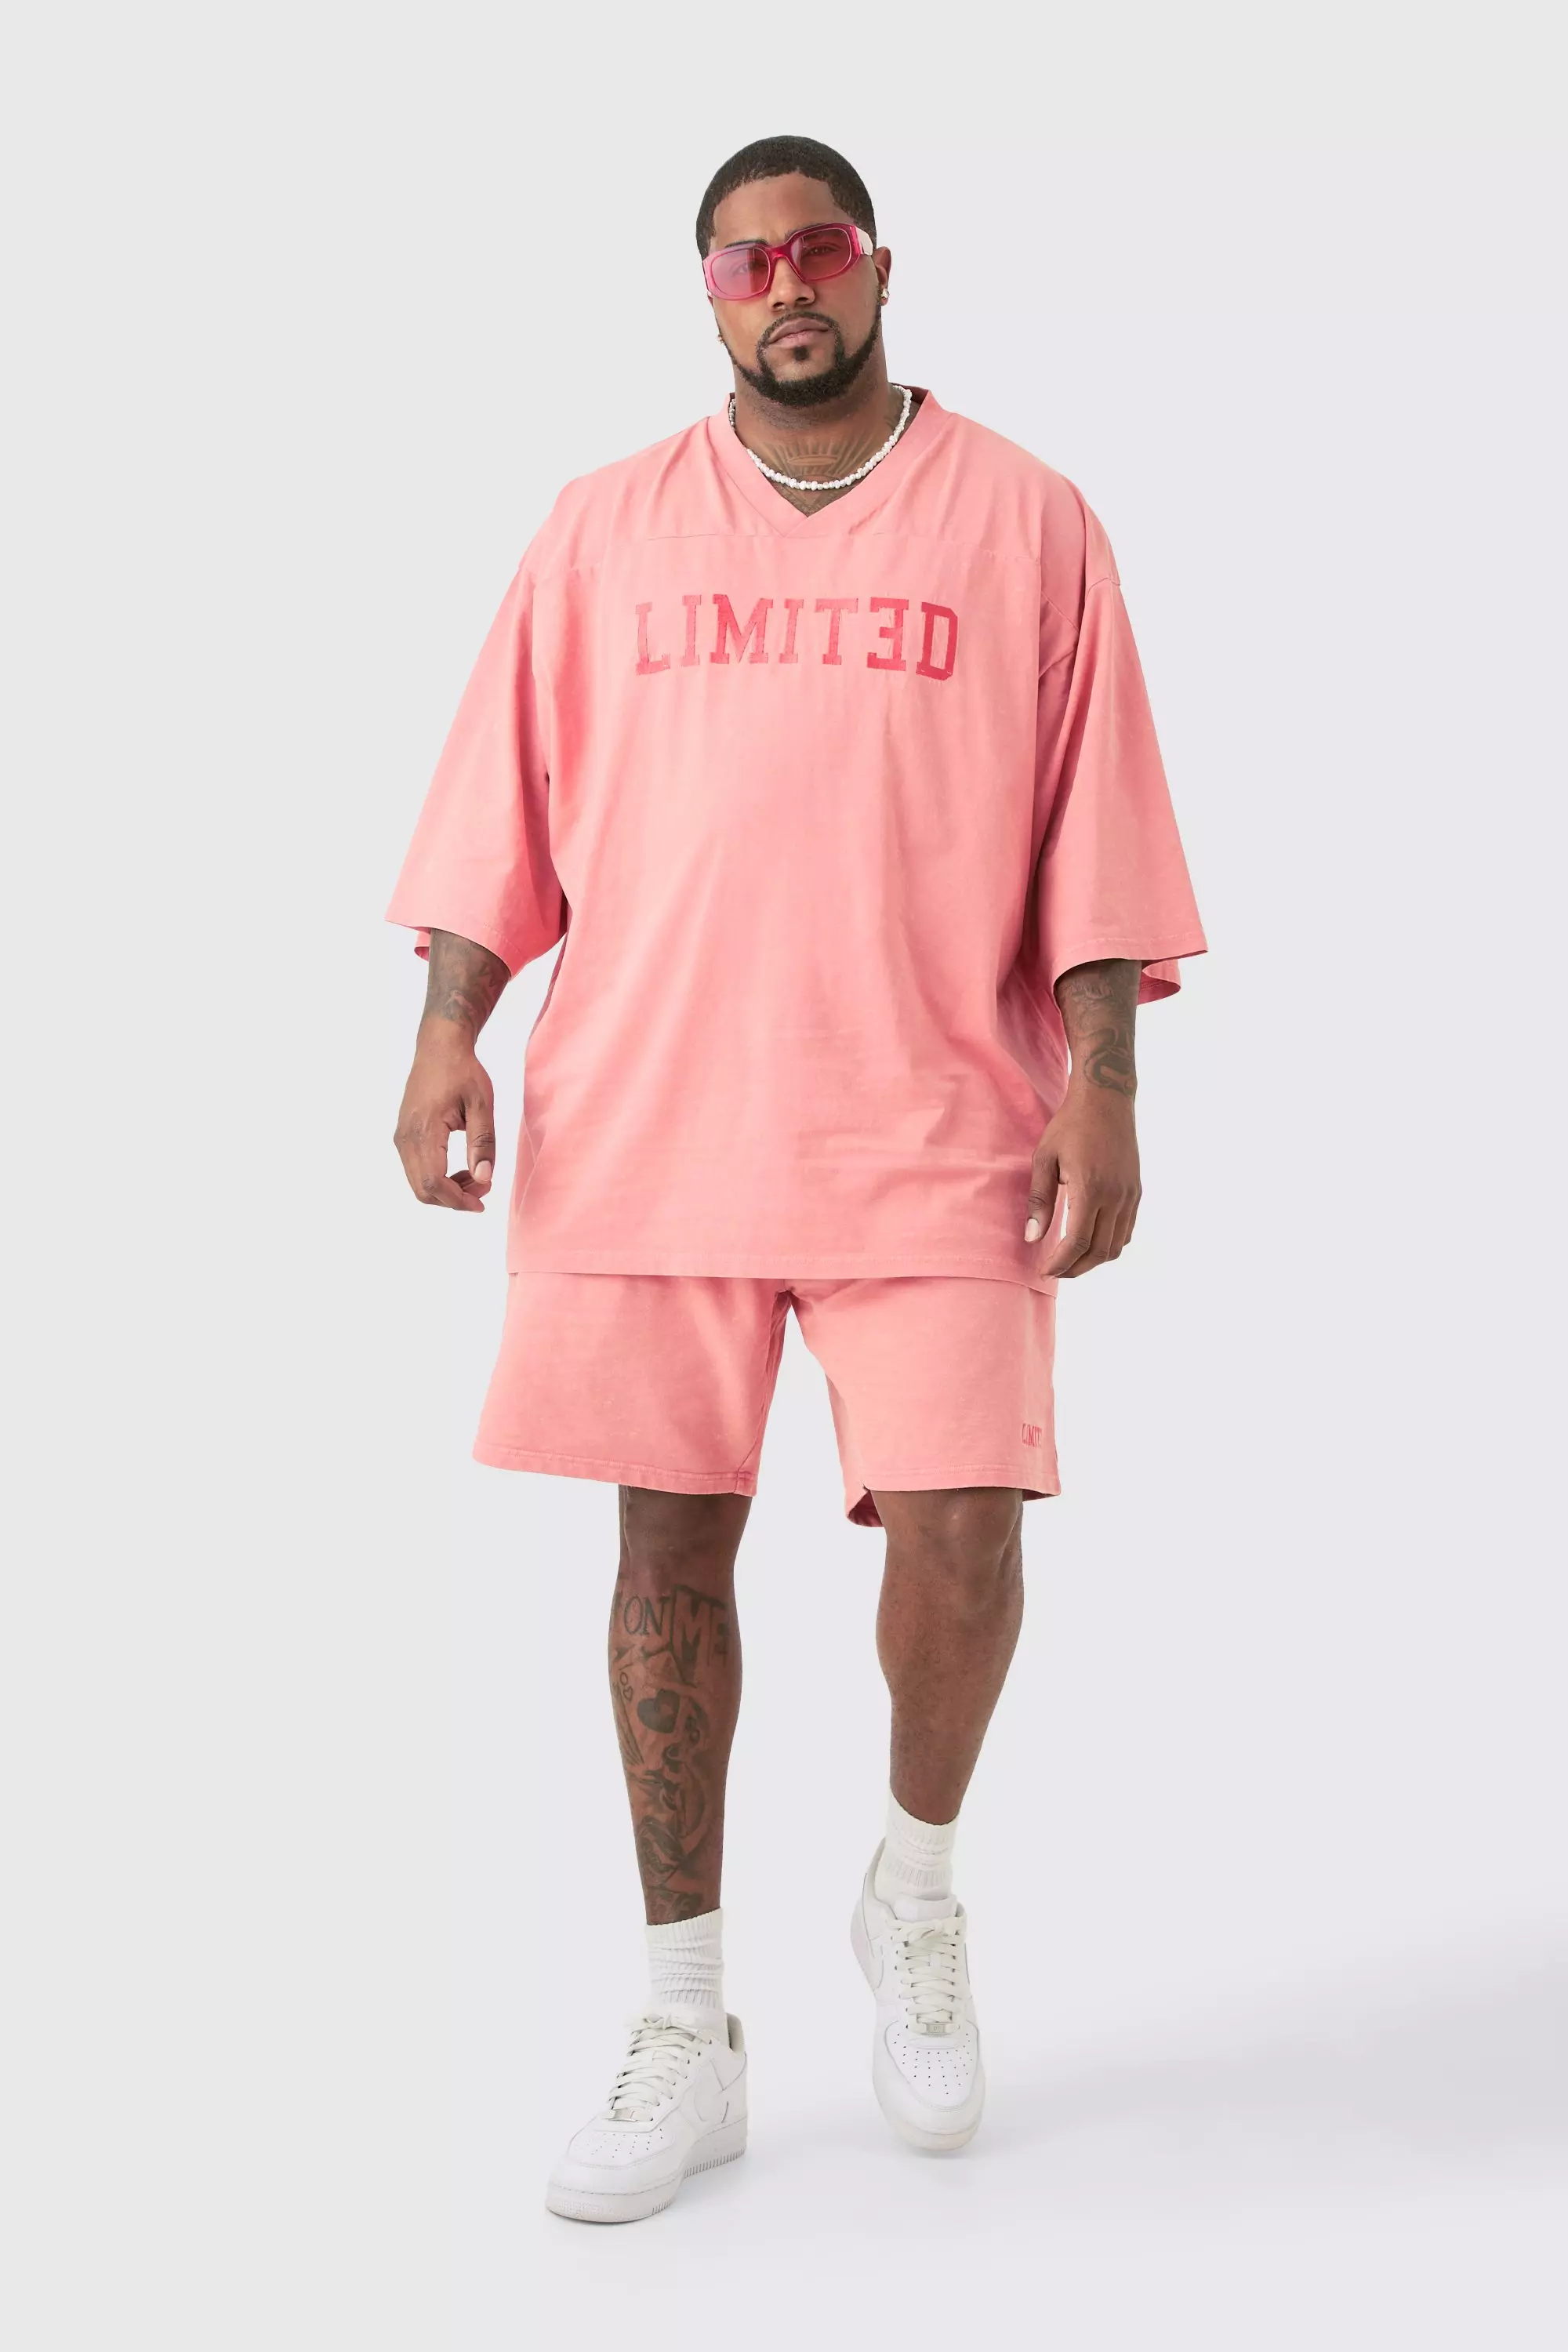 Plus Embroidered Limited Football T-shirt & Short Set Pink